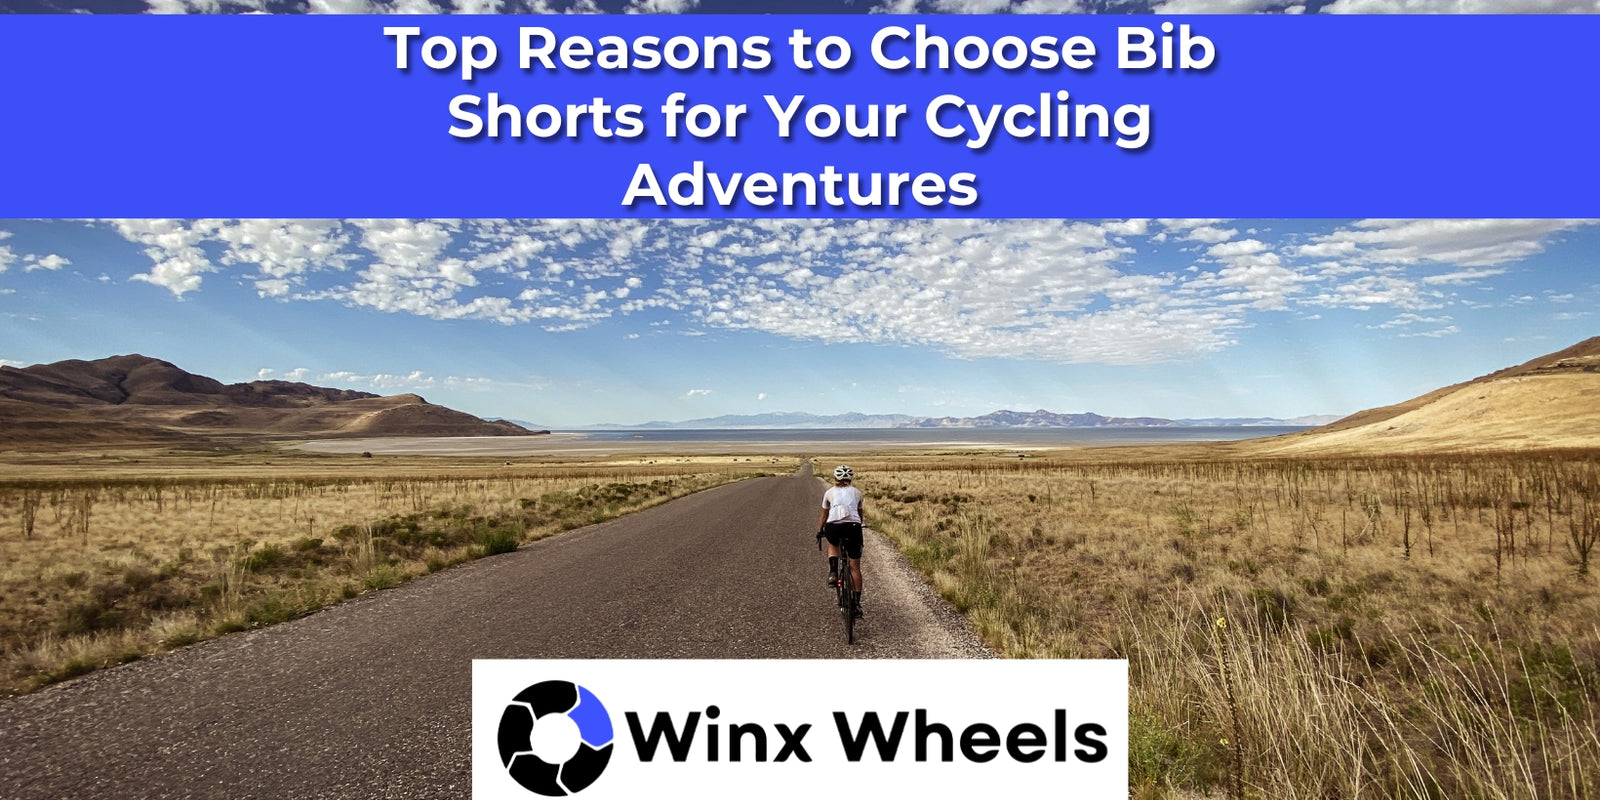 Top Reasons to Choose Bib Shorts for Your Cycling Adventures